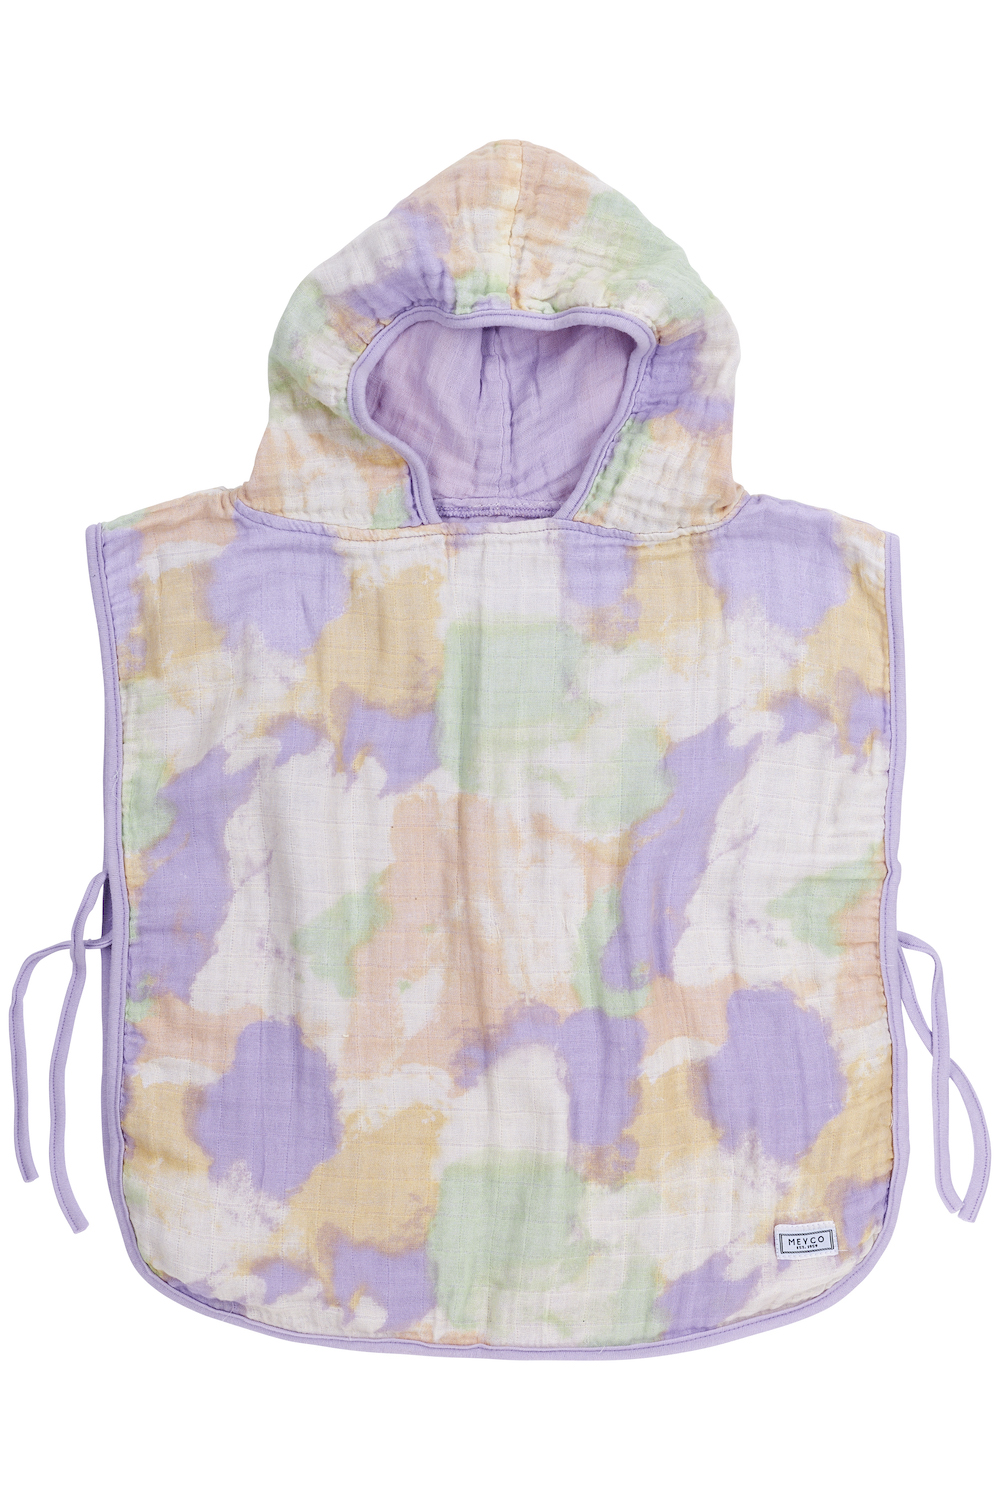 Musselin Badeponcho Tie-dye - Soft Lilac - 1-3 Jahre